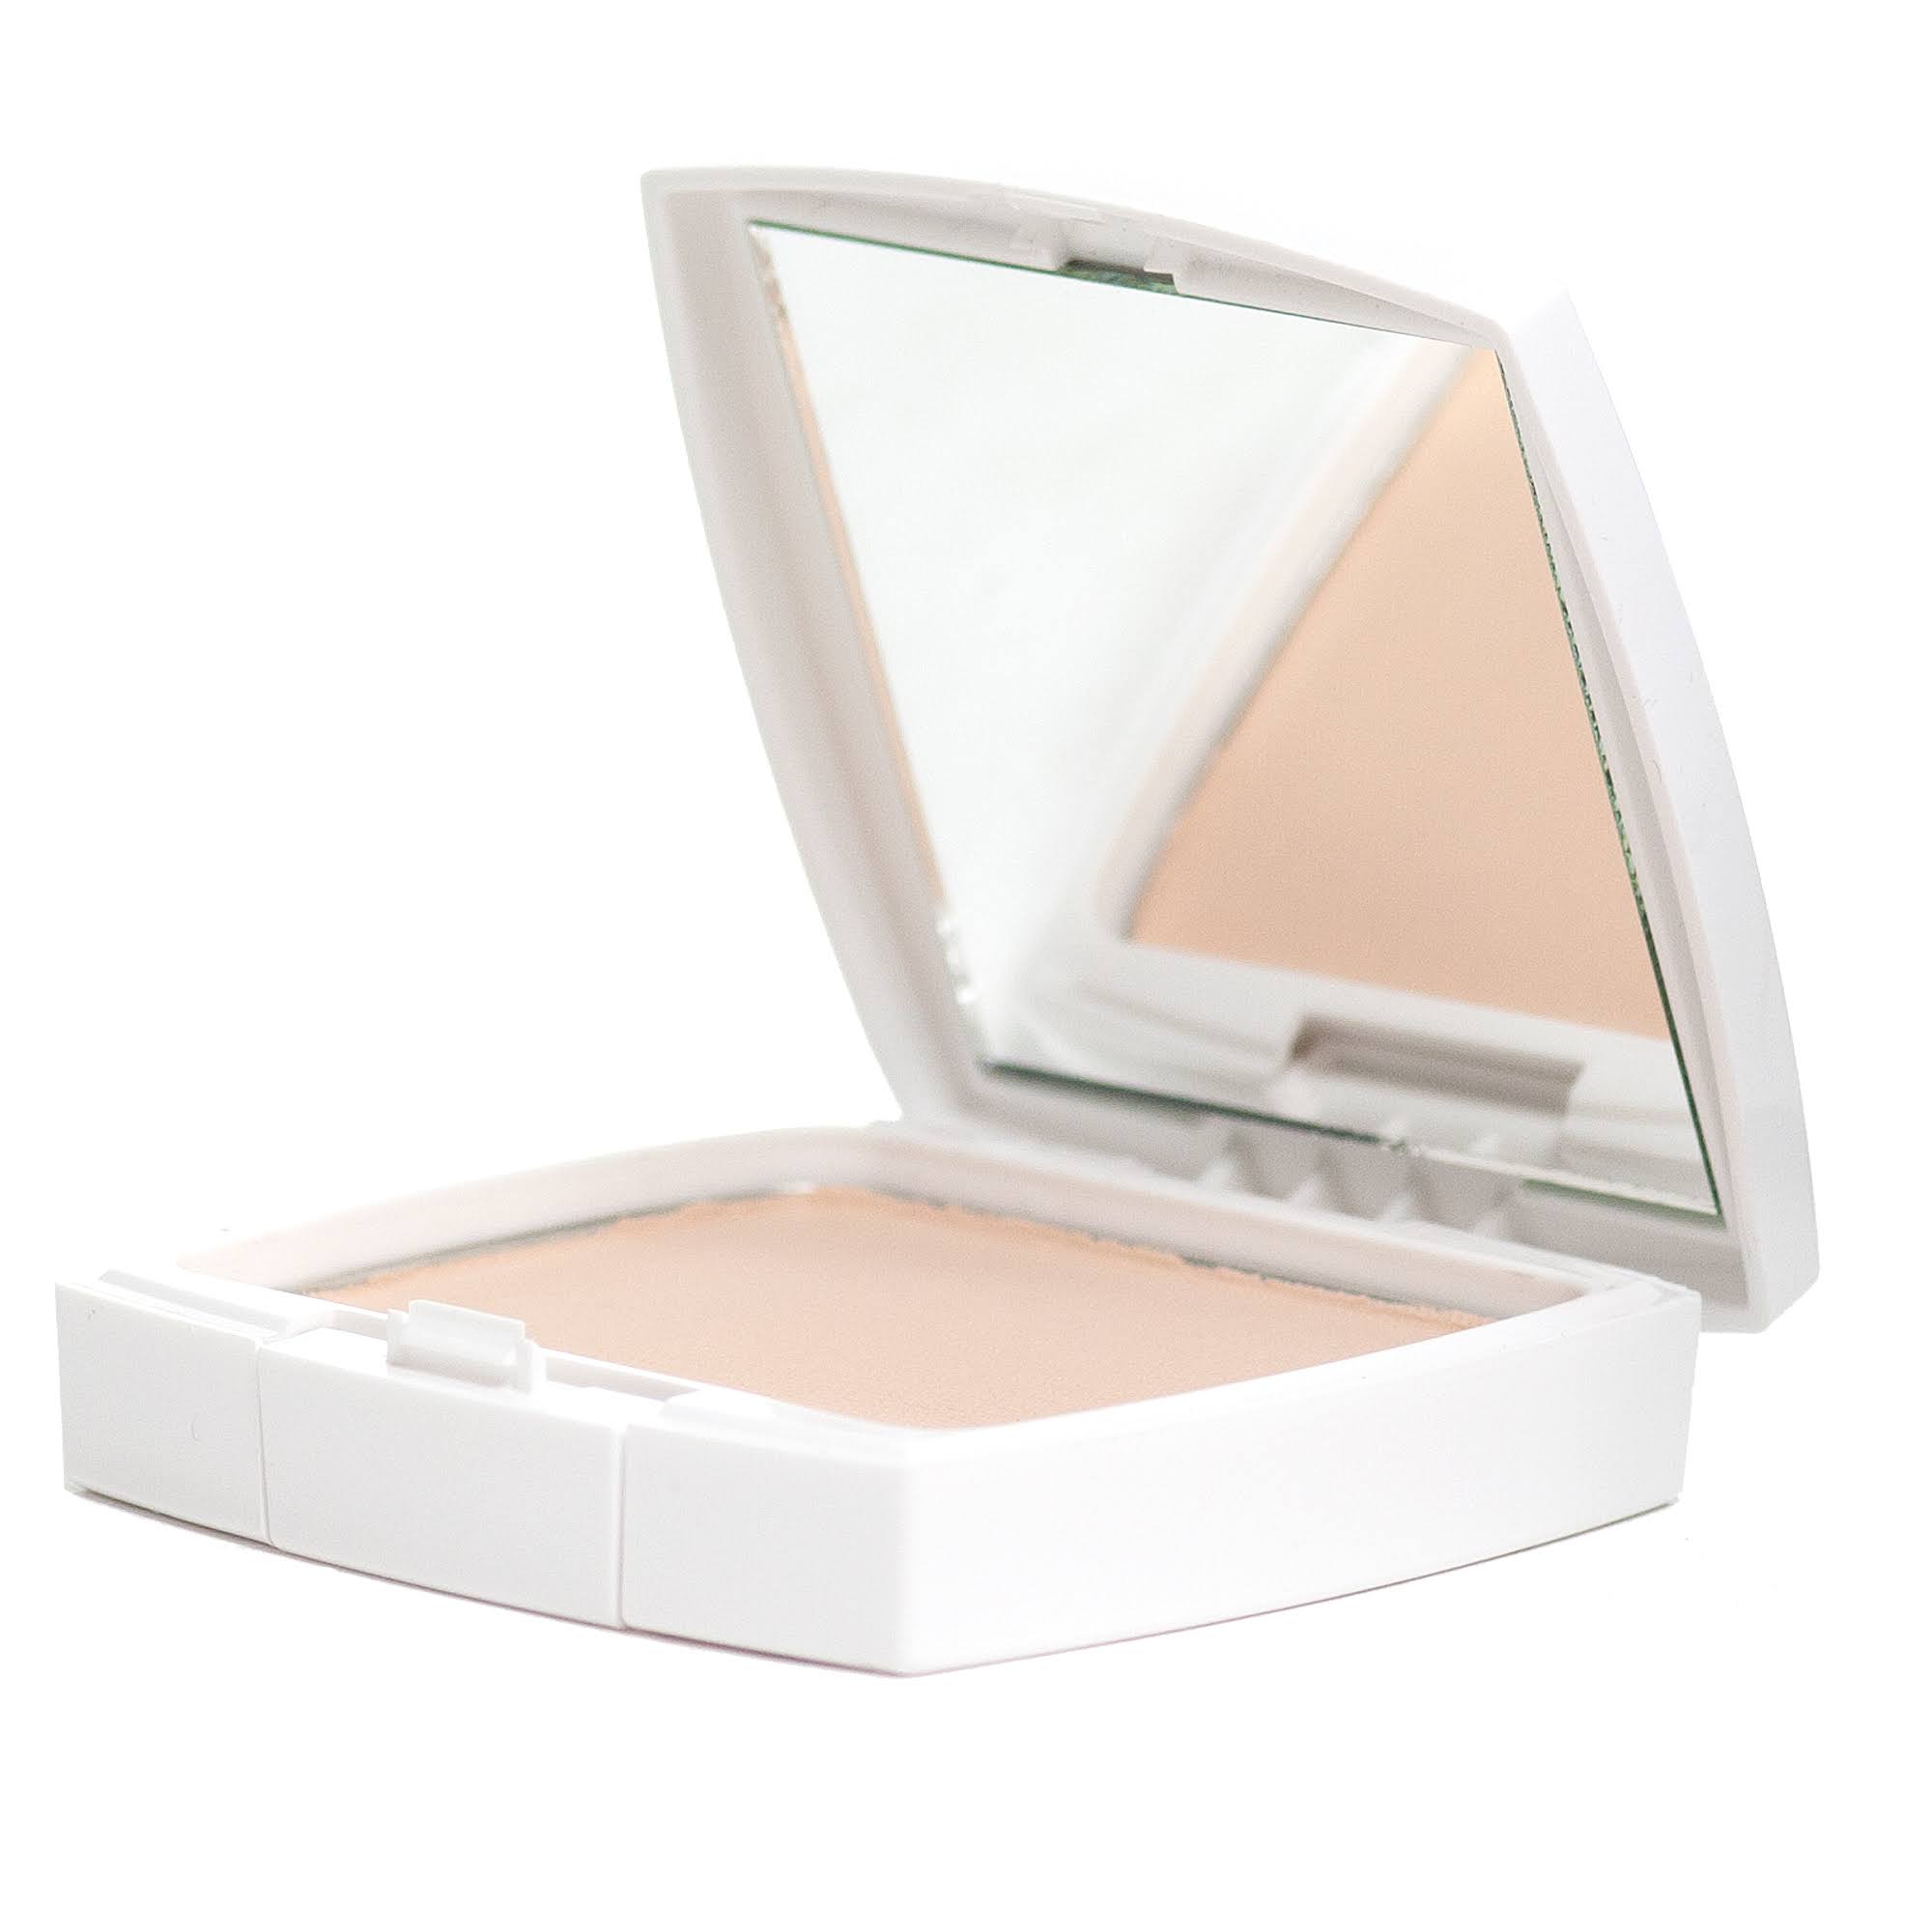 Almay Clear Complexion Pressed Powder - Light